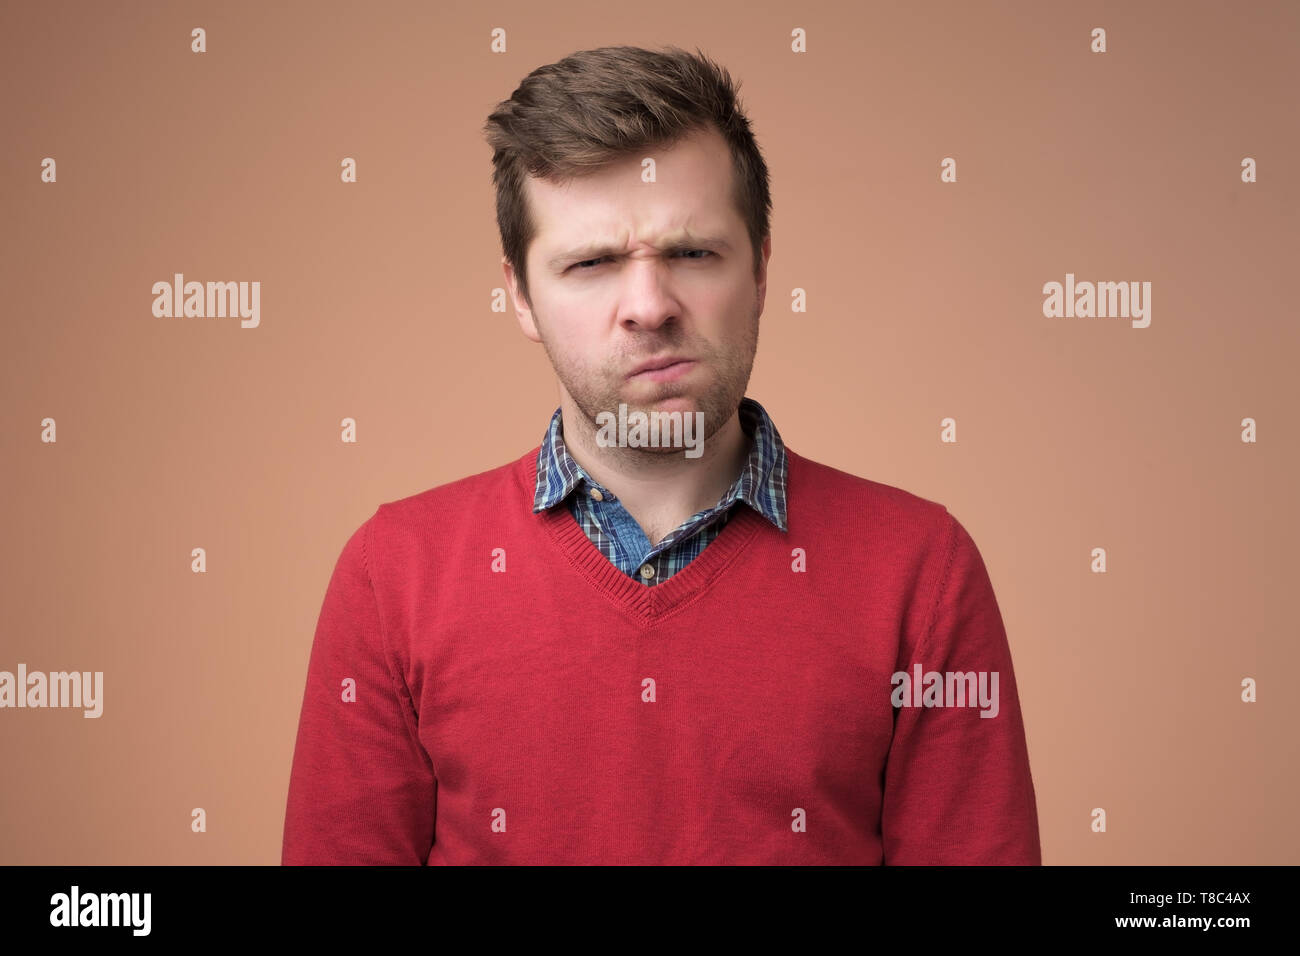 mature man in red sweater looking with disbelief expression Stock Photo